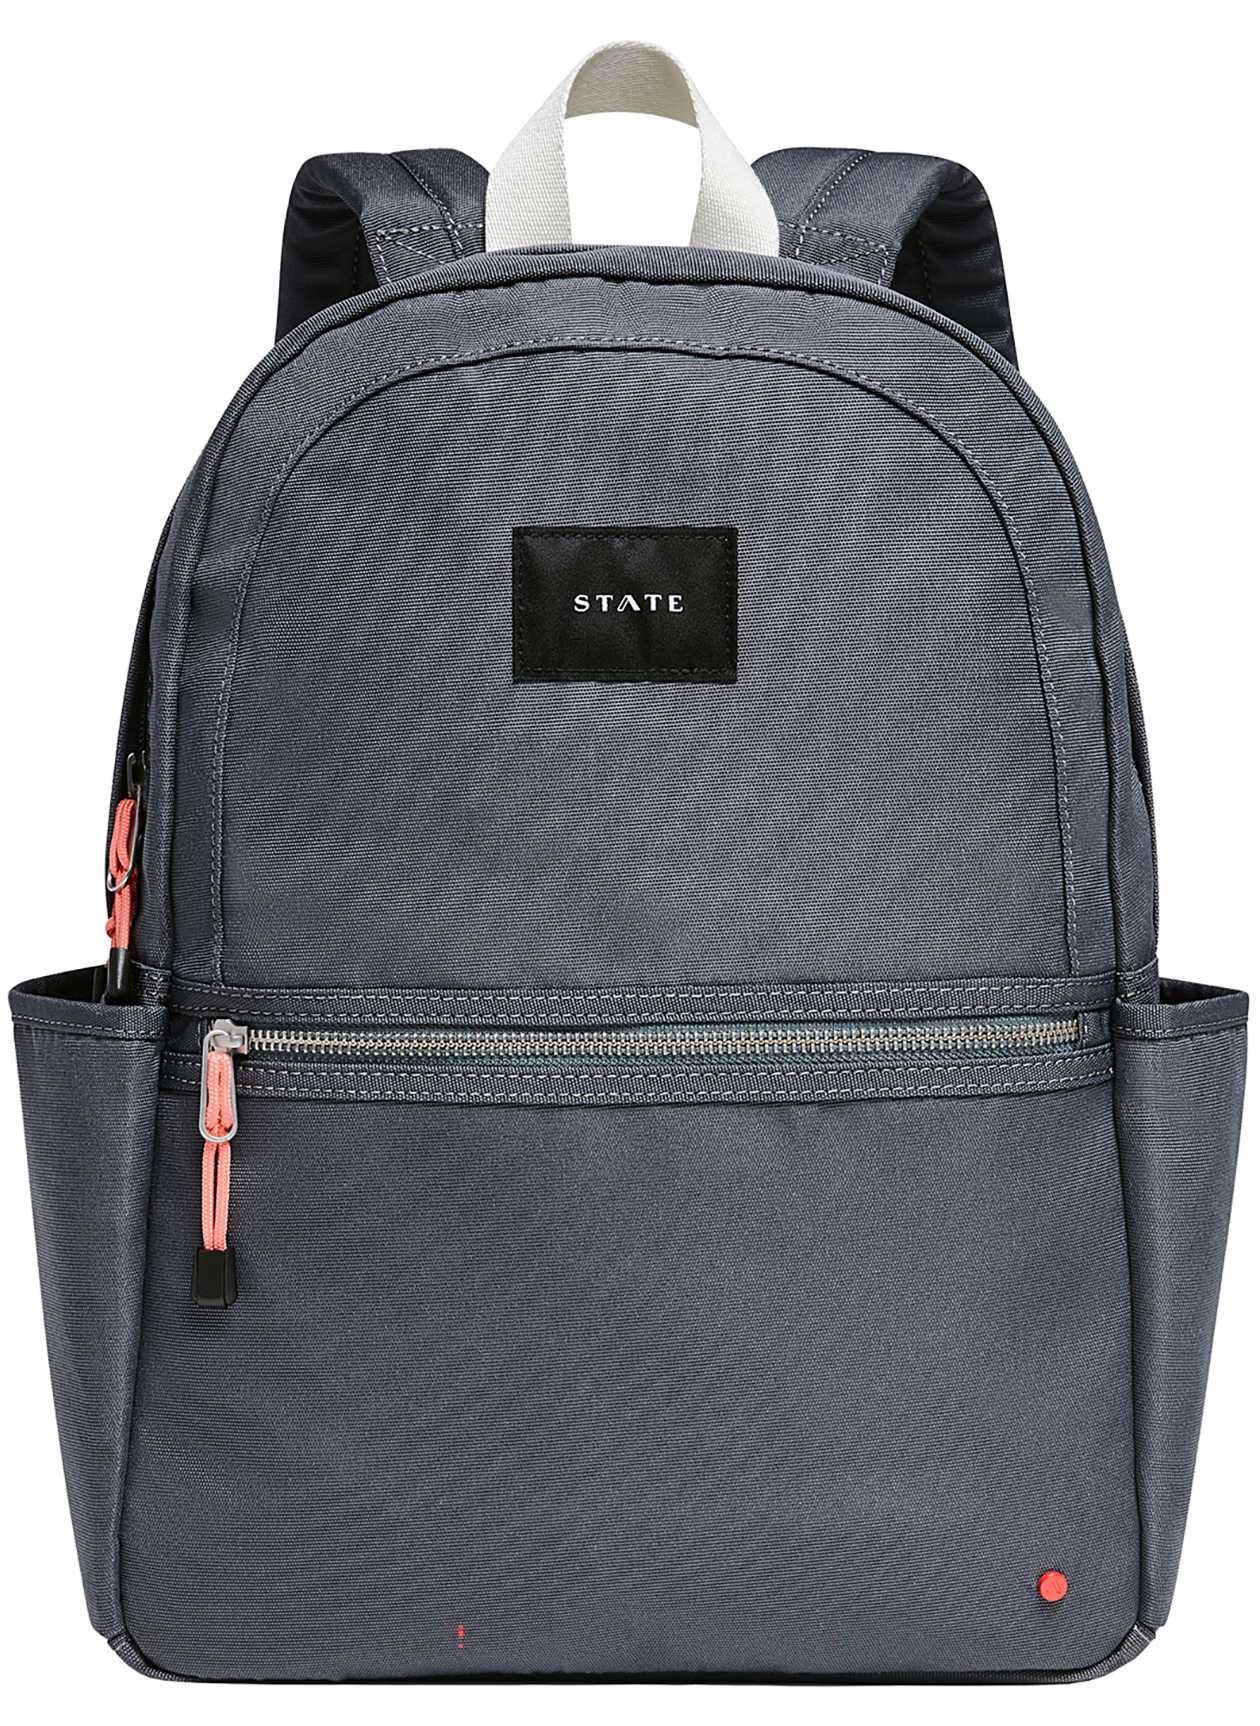 STATE Bags X1061388 - Kane Double Pocket Polycanvas Backpack